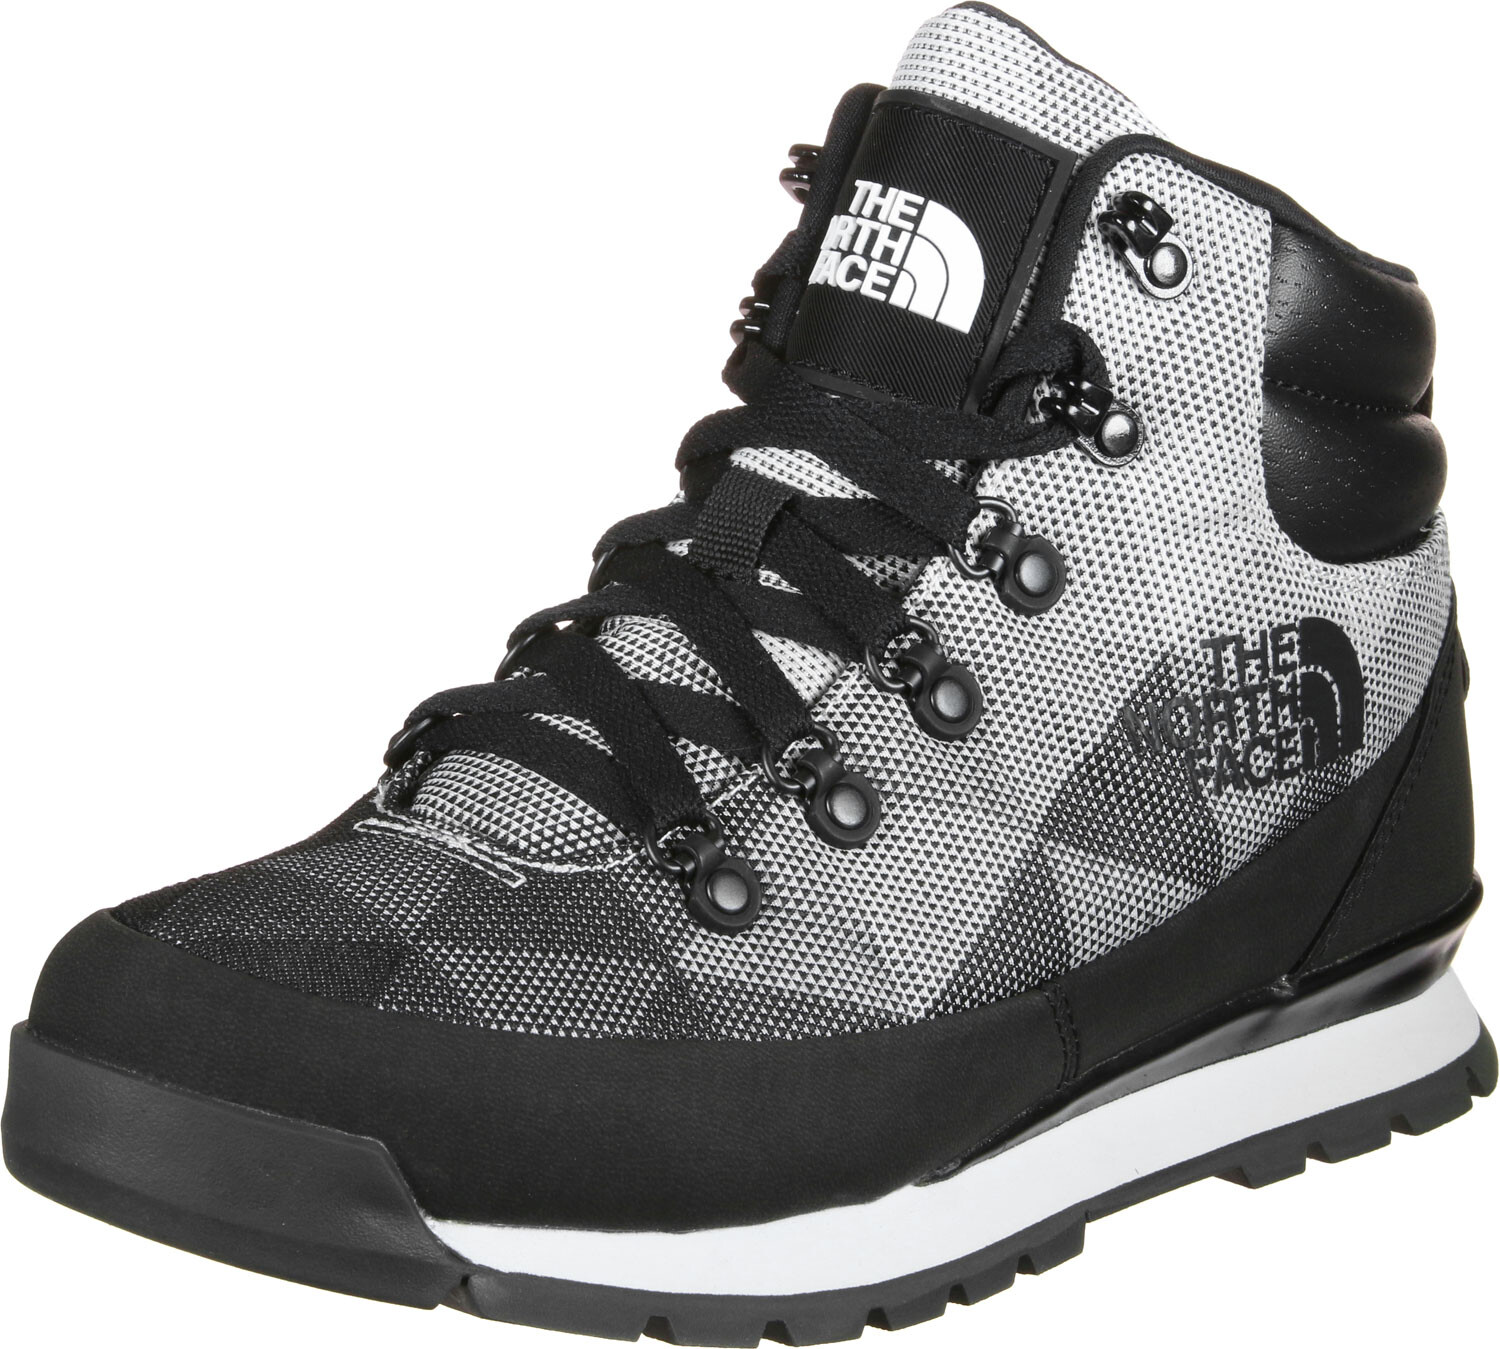 north face back to berkeley redux boots